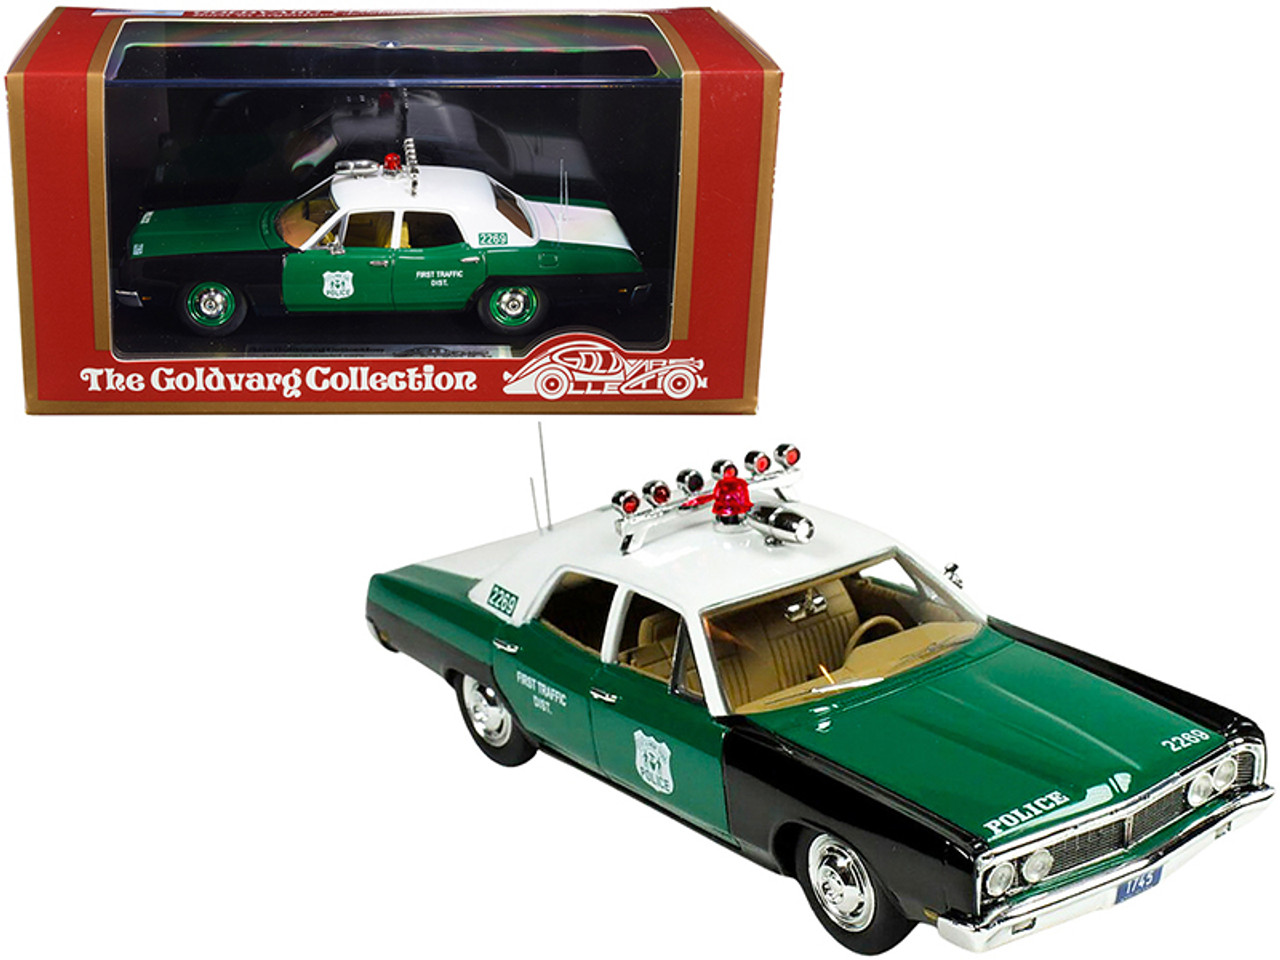 1970 Ford Galaxie NYPD "New York City Police Department" Green and Black with White Top Limited Edition to 280 pieces Worldwide 1/43 Model Car by Goldvarg Collection